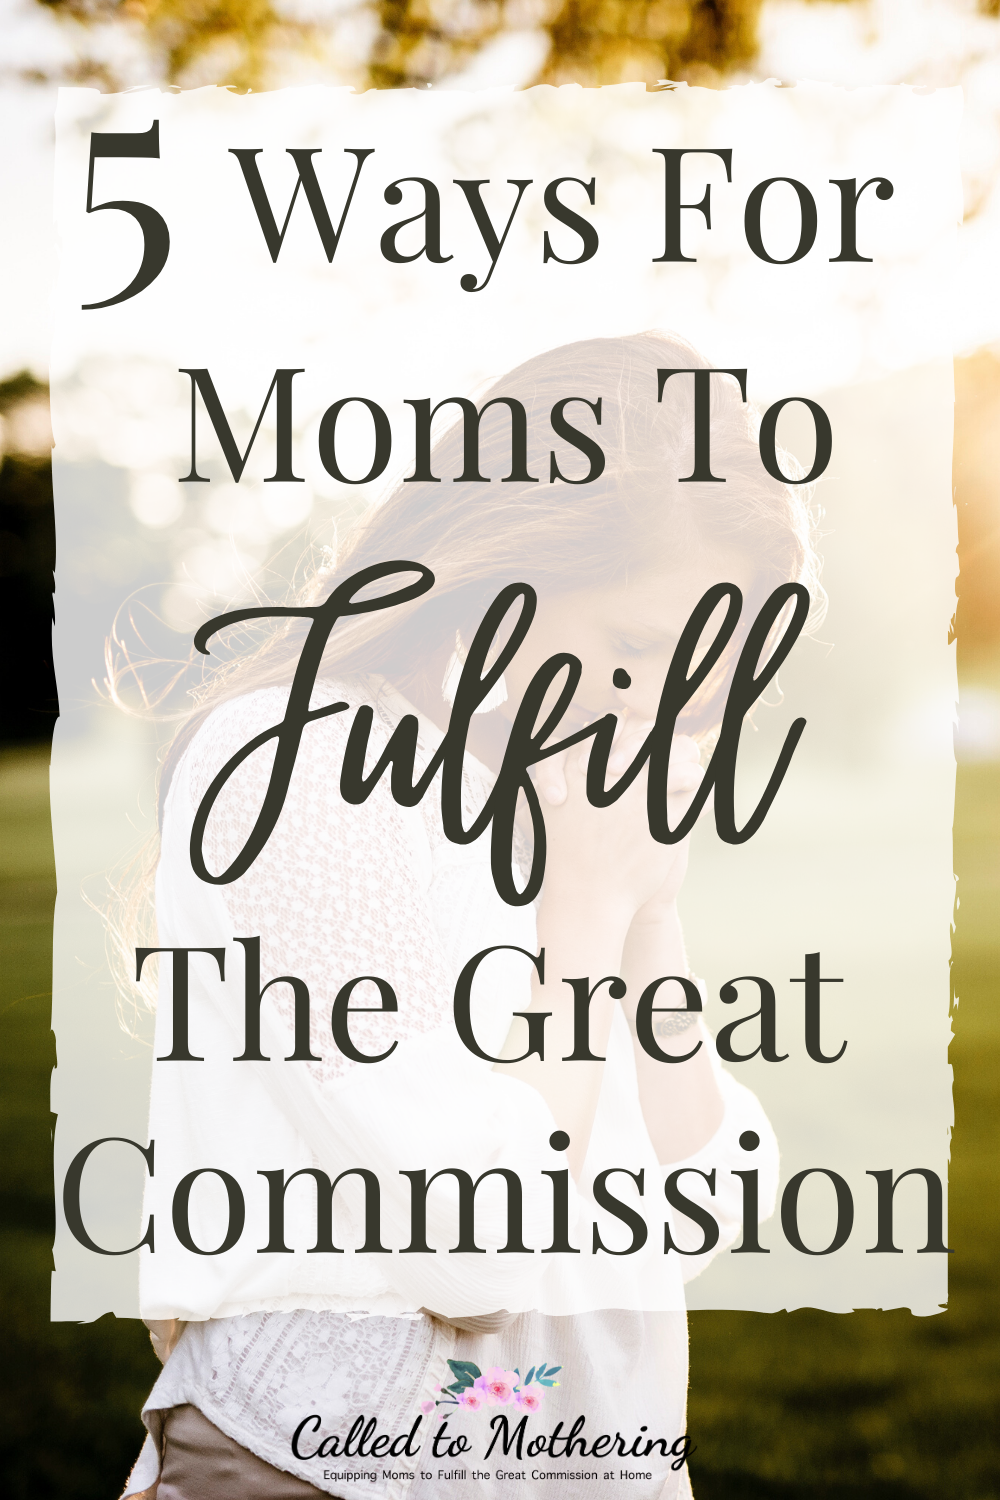 You can make an impact for the Gospel as a stay-at-home mom with these 5 simple, practical suggestions! #christianmotherhood #sharingyourfaith